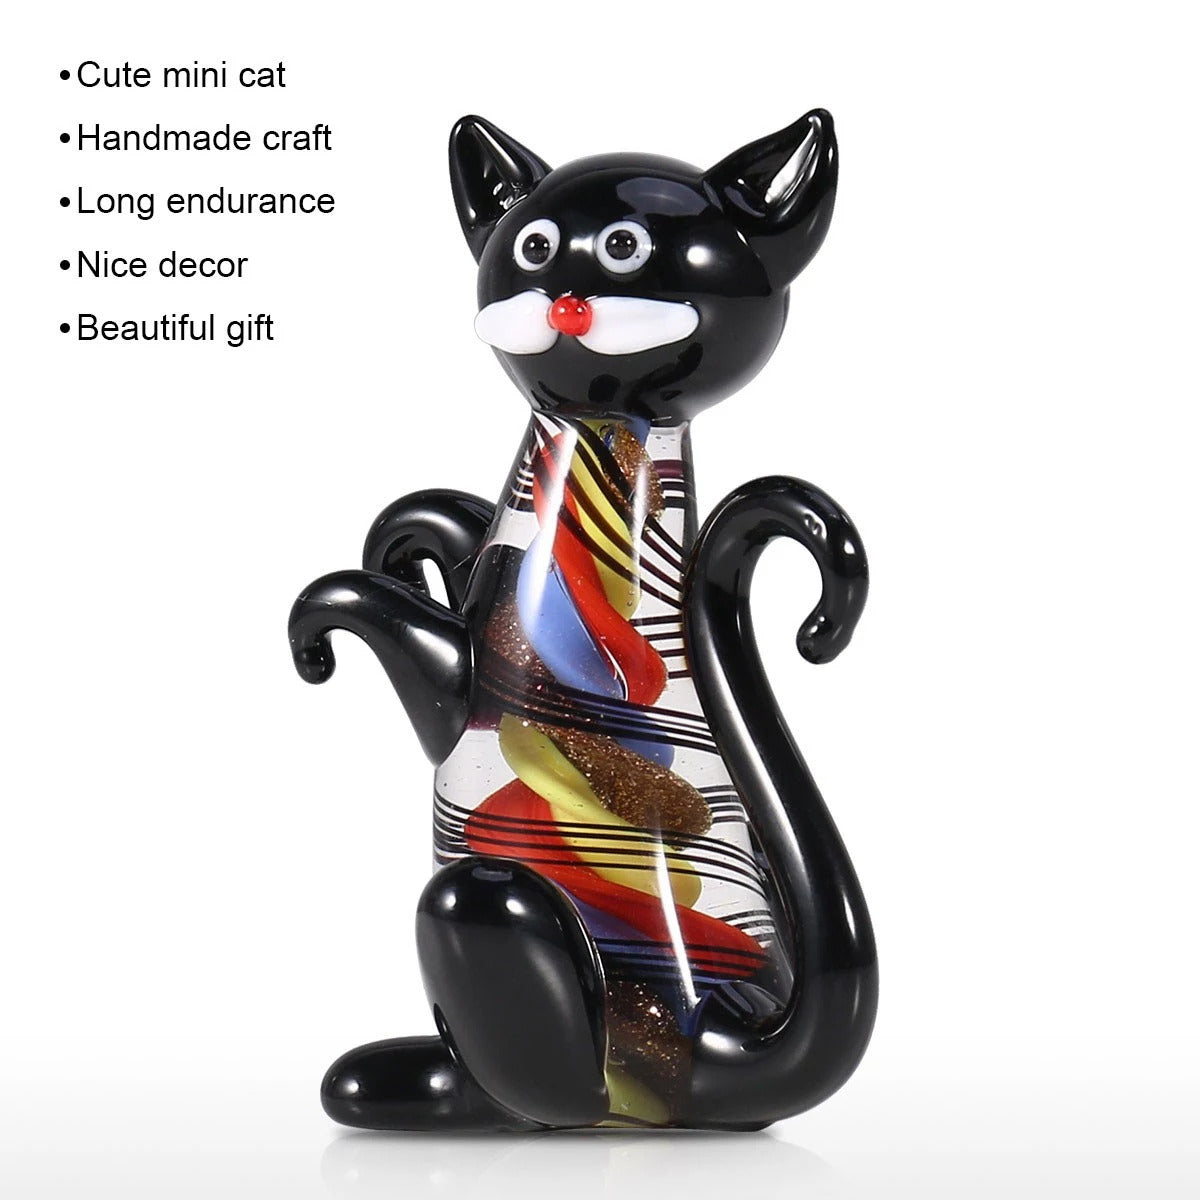 Glass Sculpture Ornaments with Cat Figurines